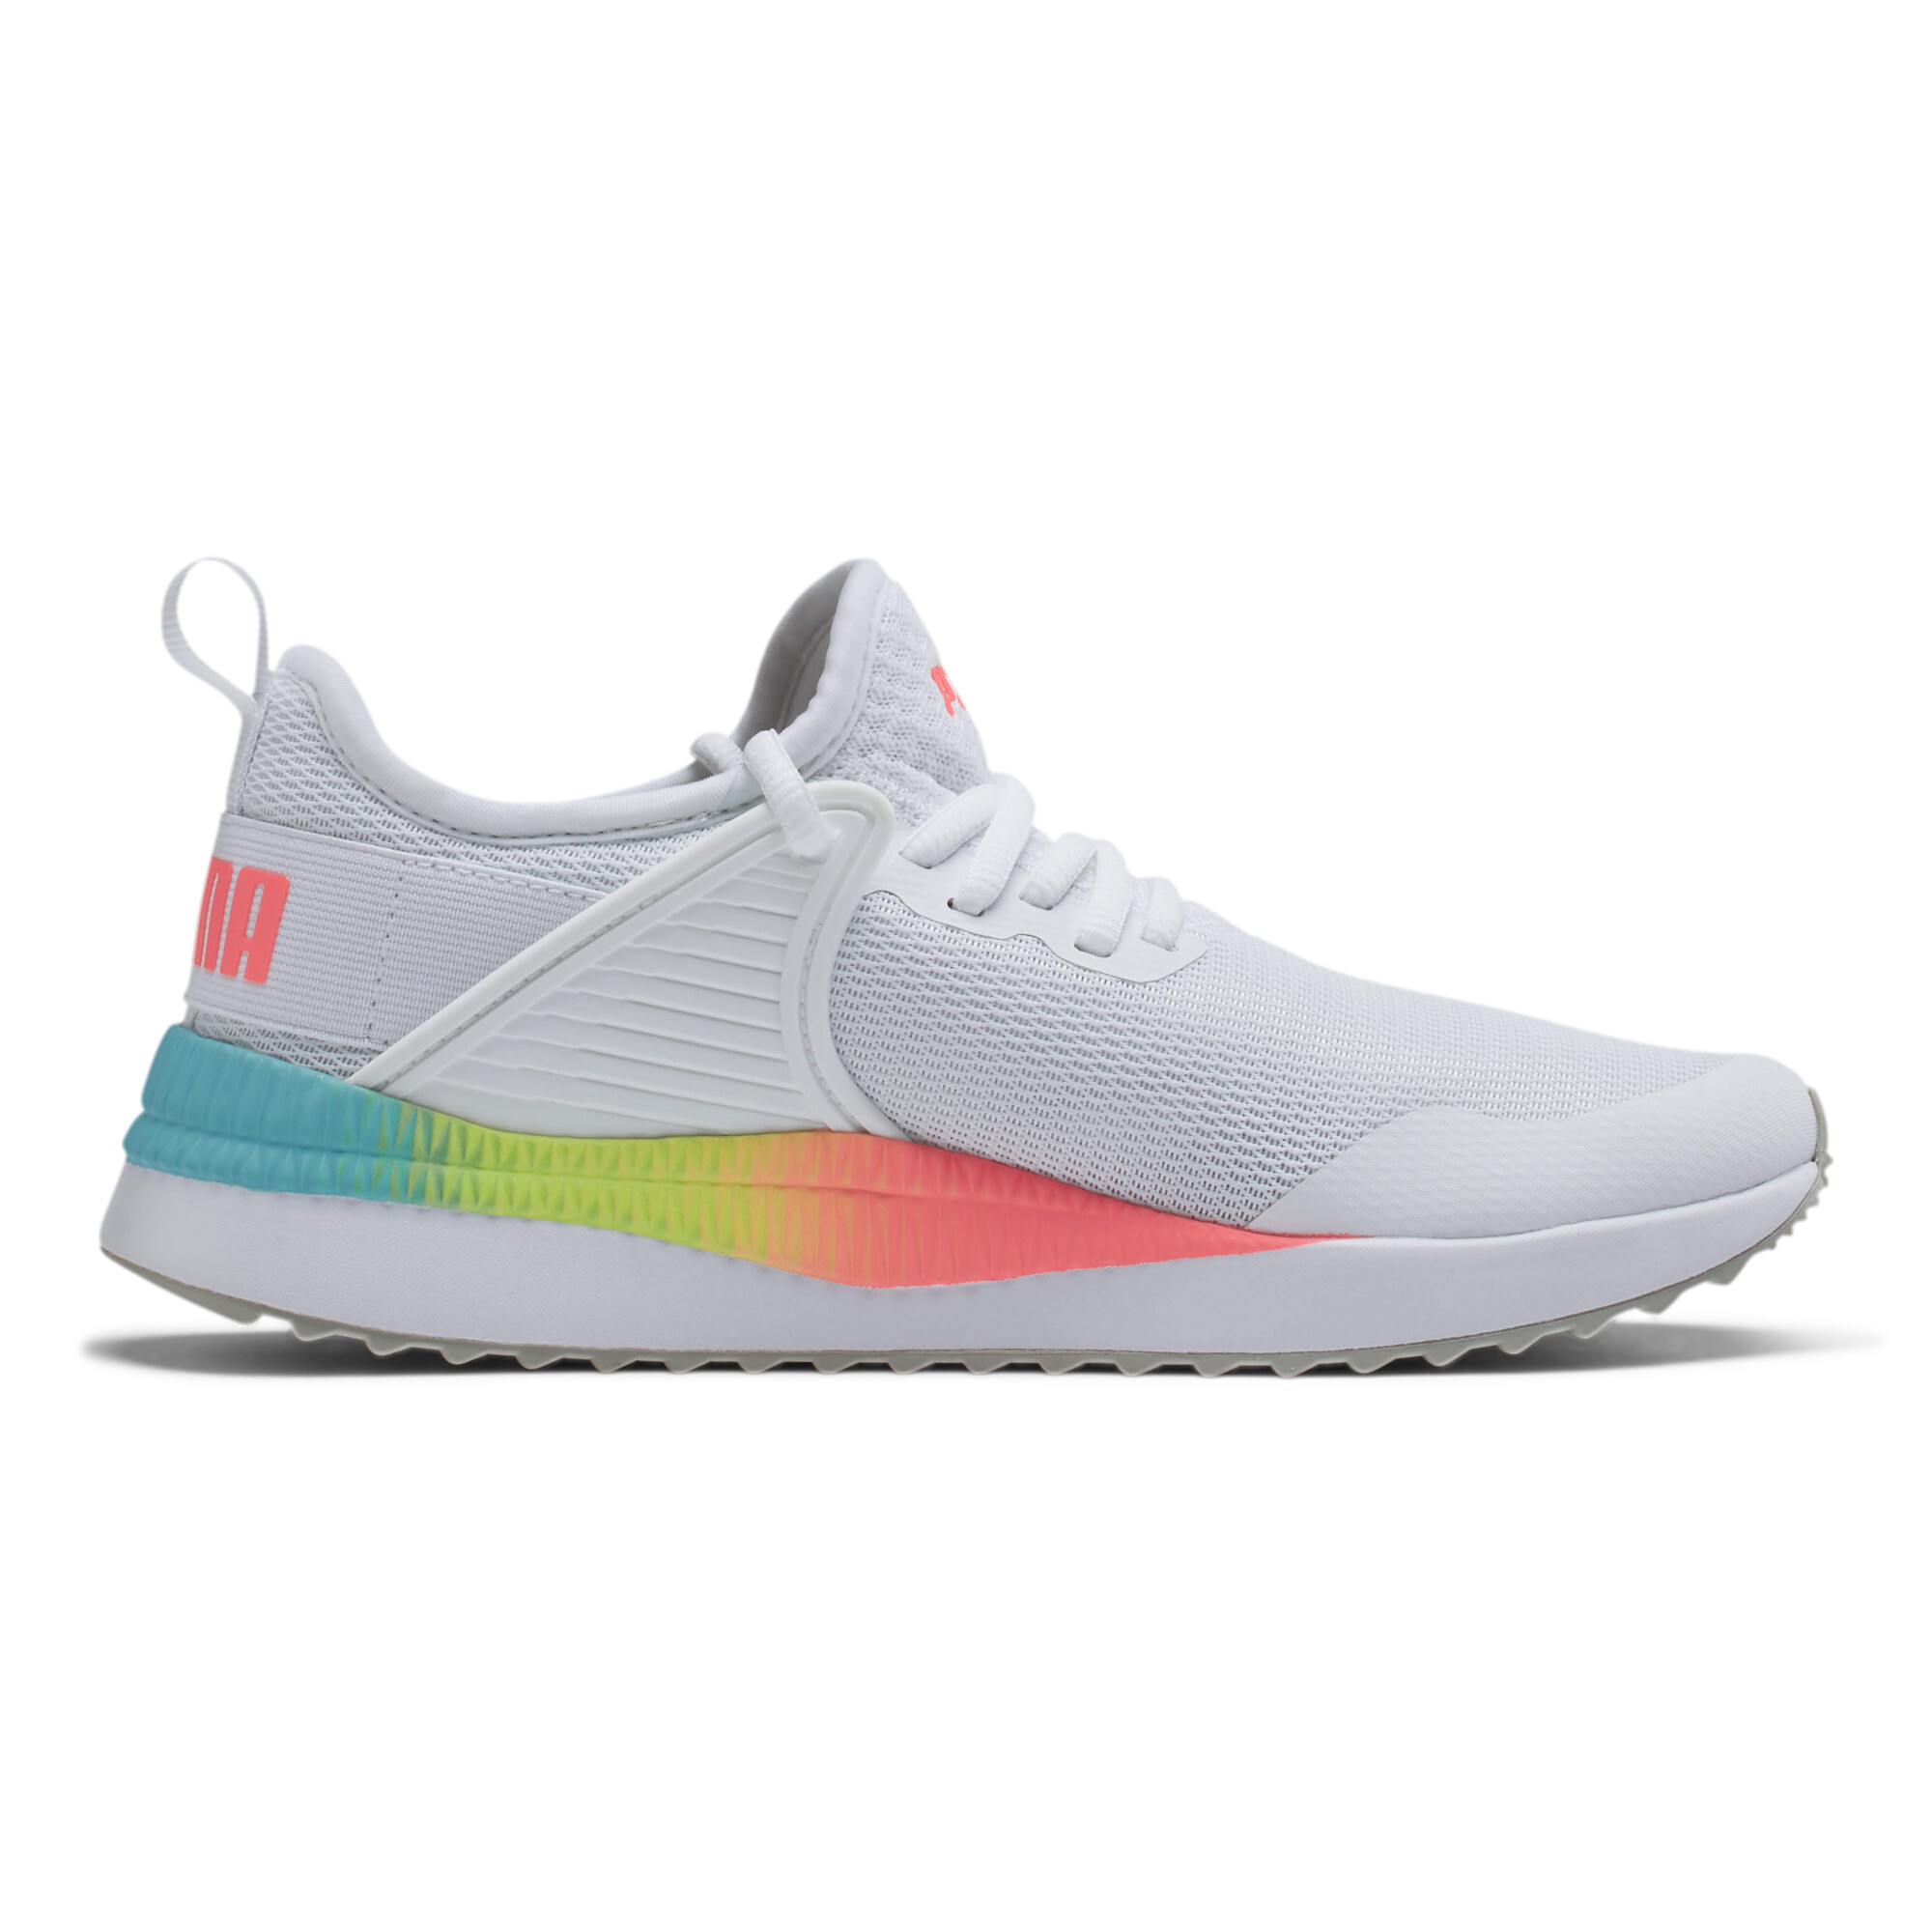 PUMA Women's Pacer Next Cage Rainbow Sneakers eBay